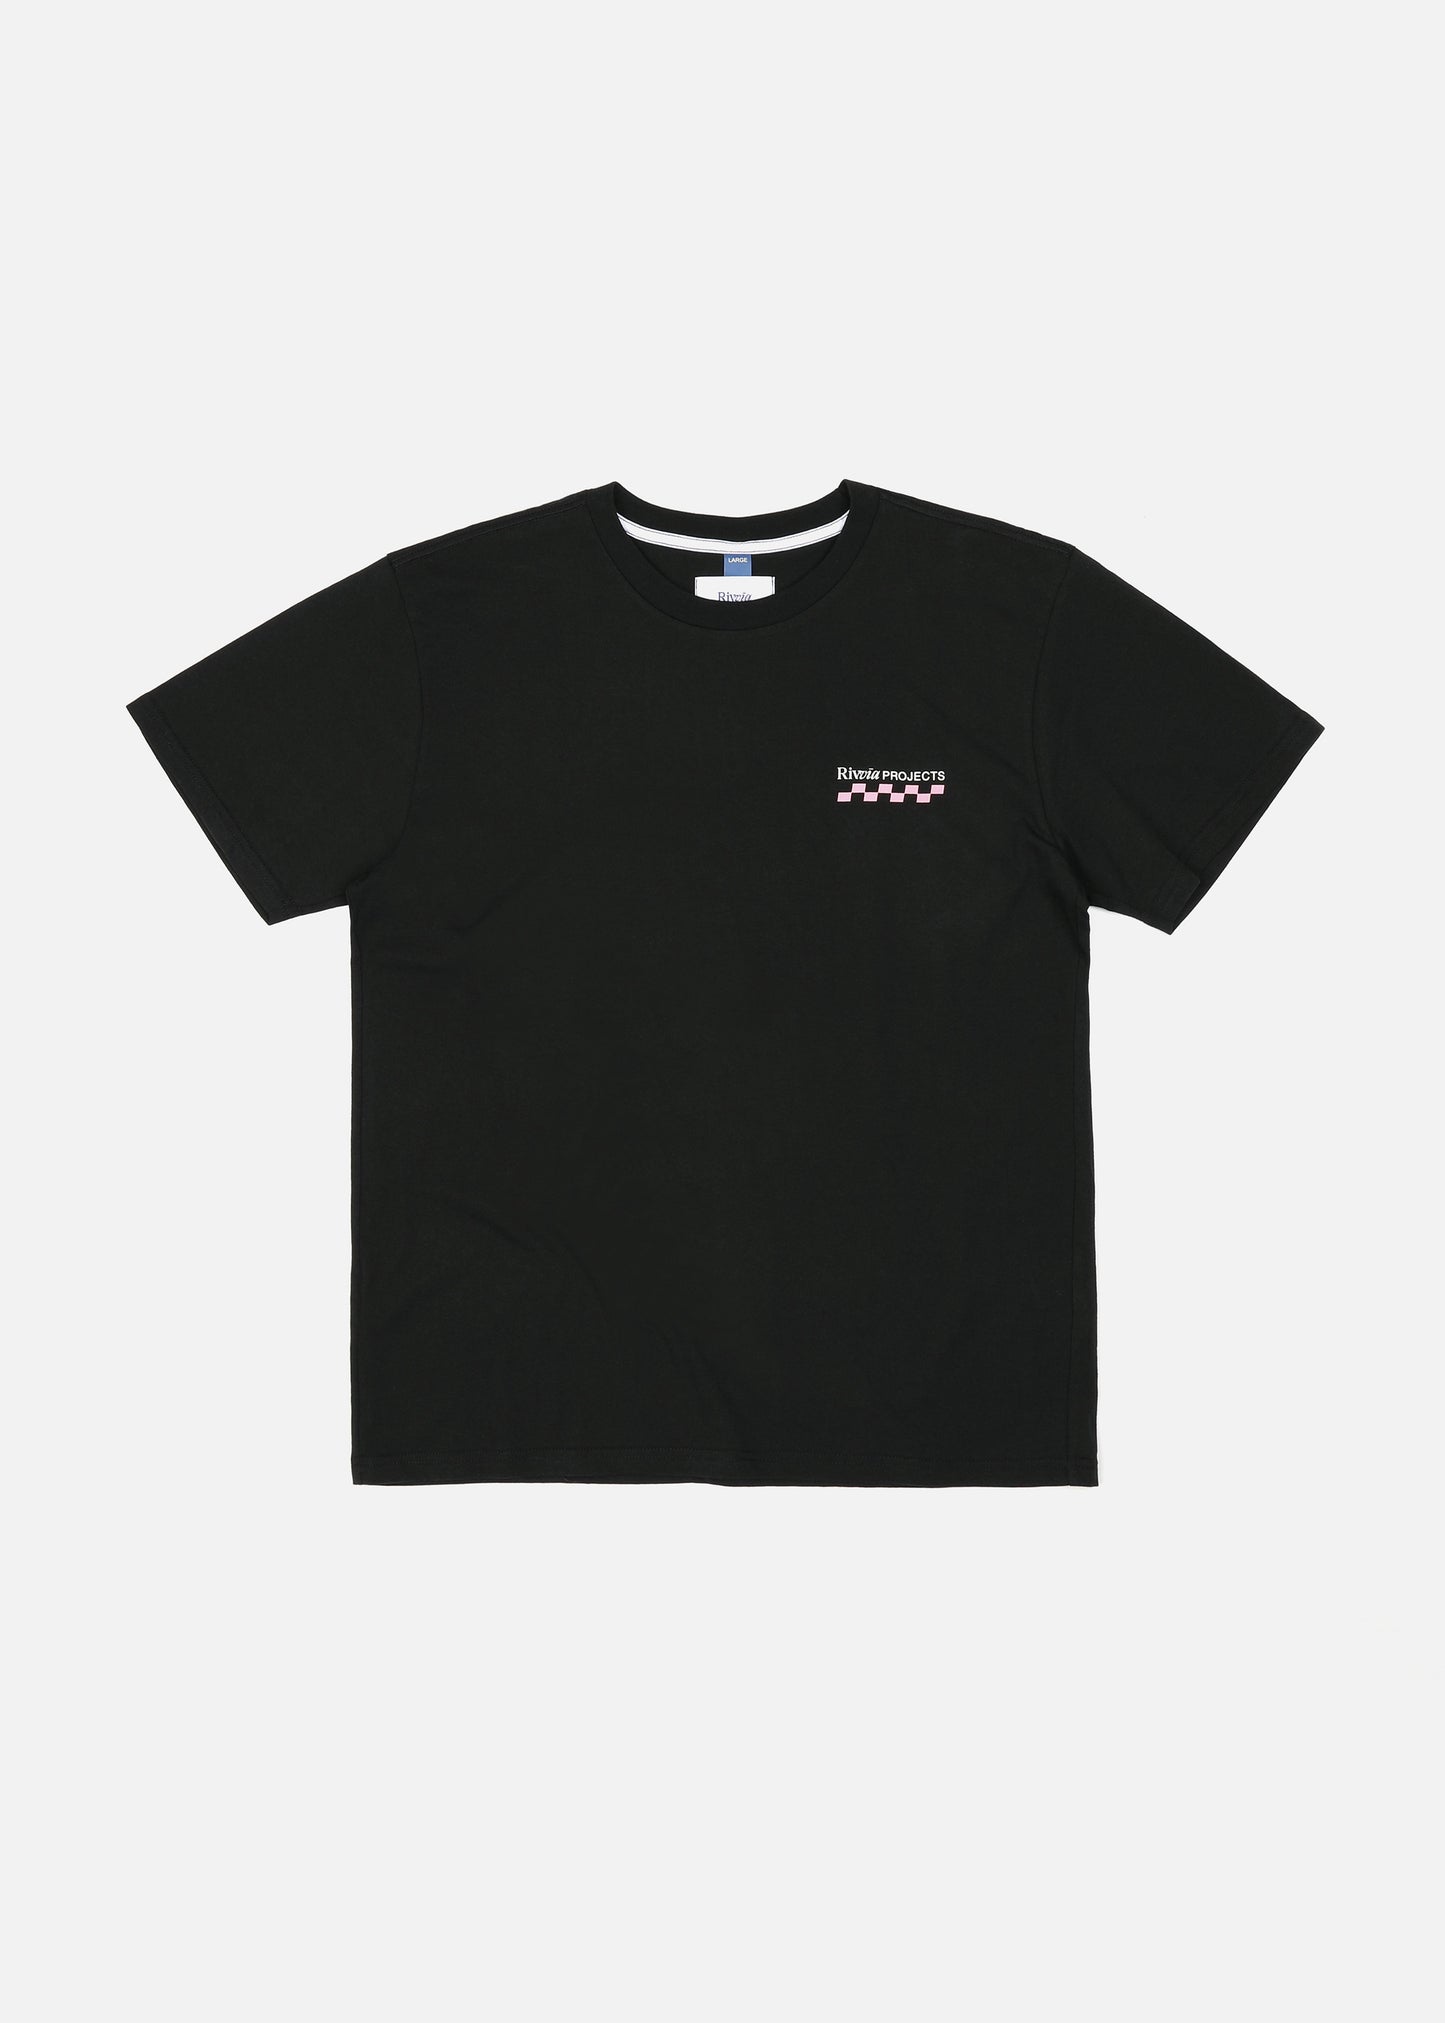 Grand Projects Tee